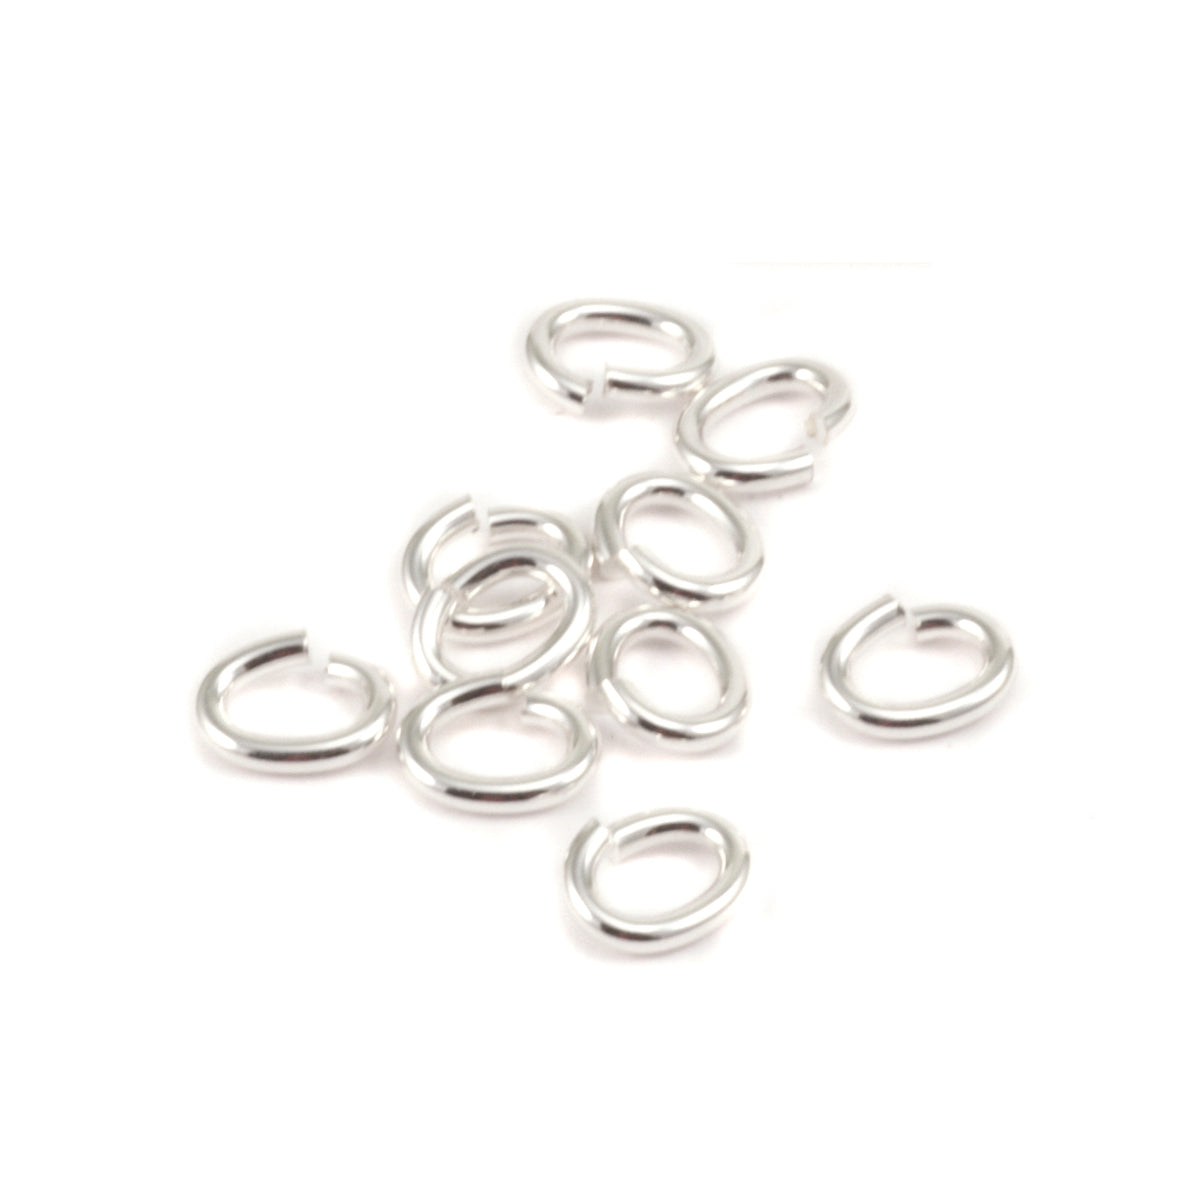 Buy O-rings and jumprings for do it yourself jewelry online